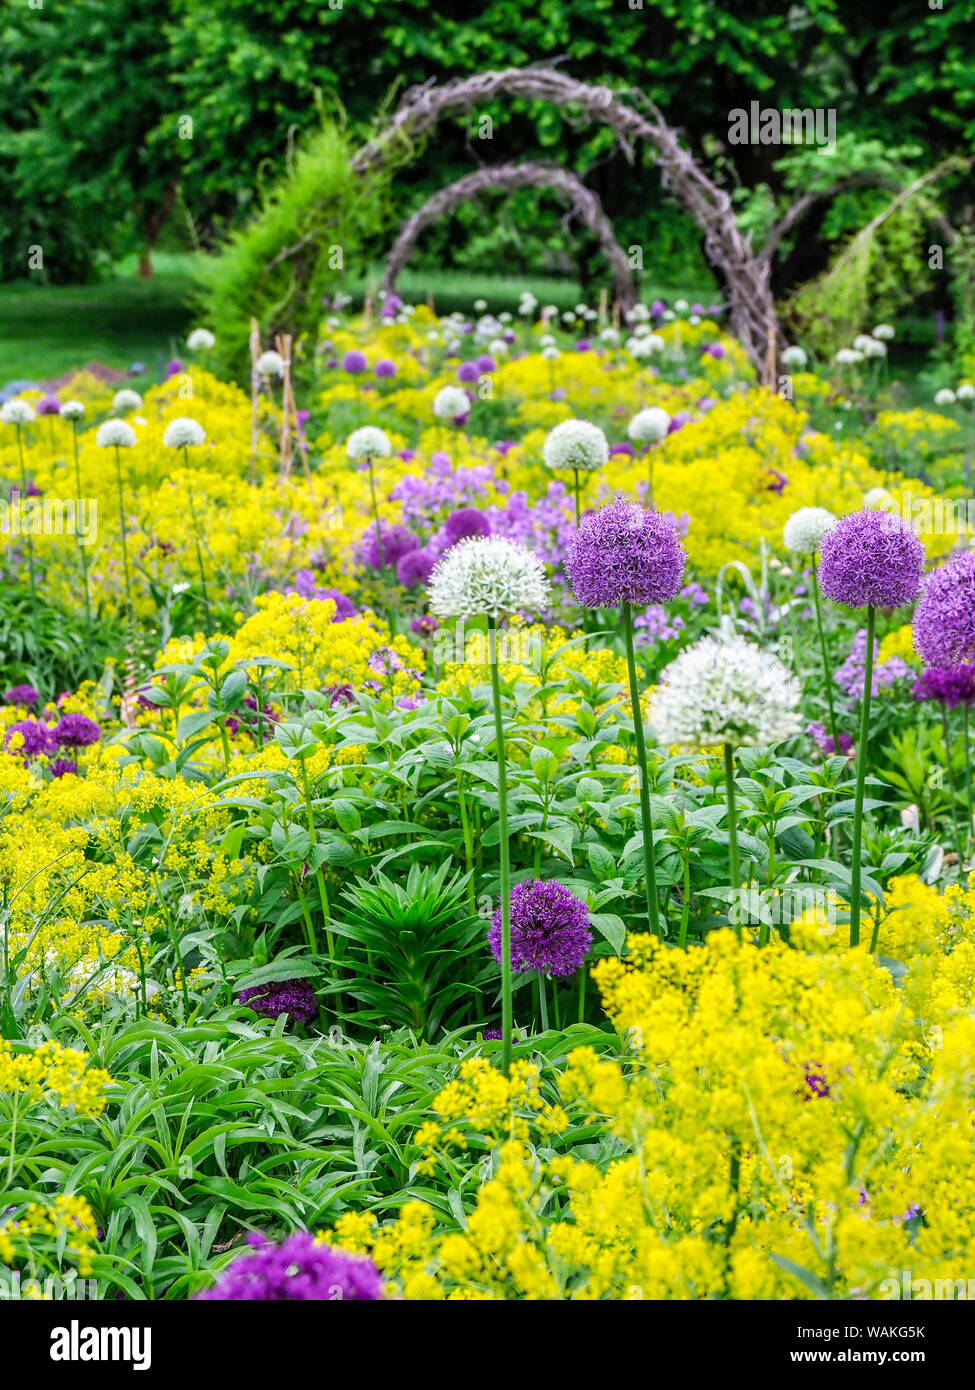 USA, Pennsylvania. Blooming allium amongst yellow flowers with several twig archways. Stock Photo